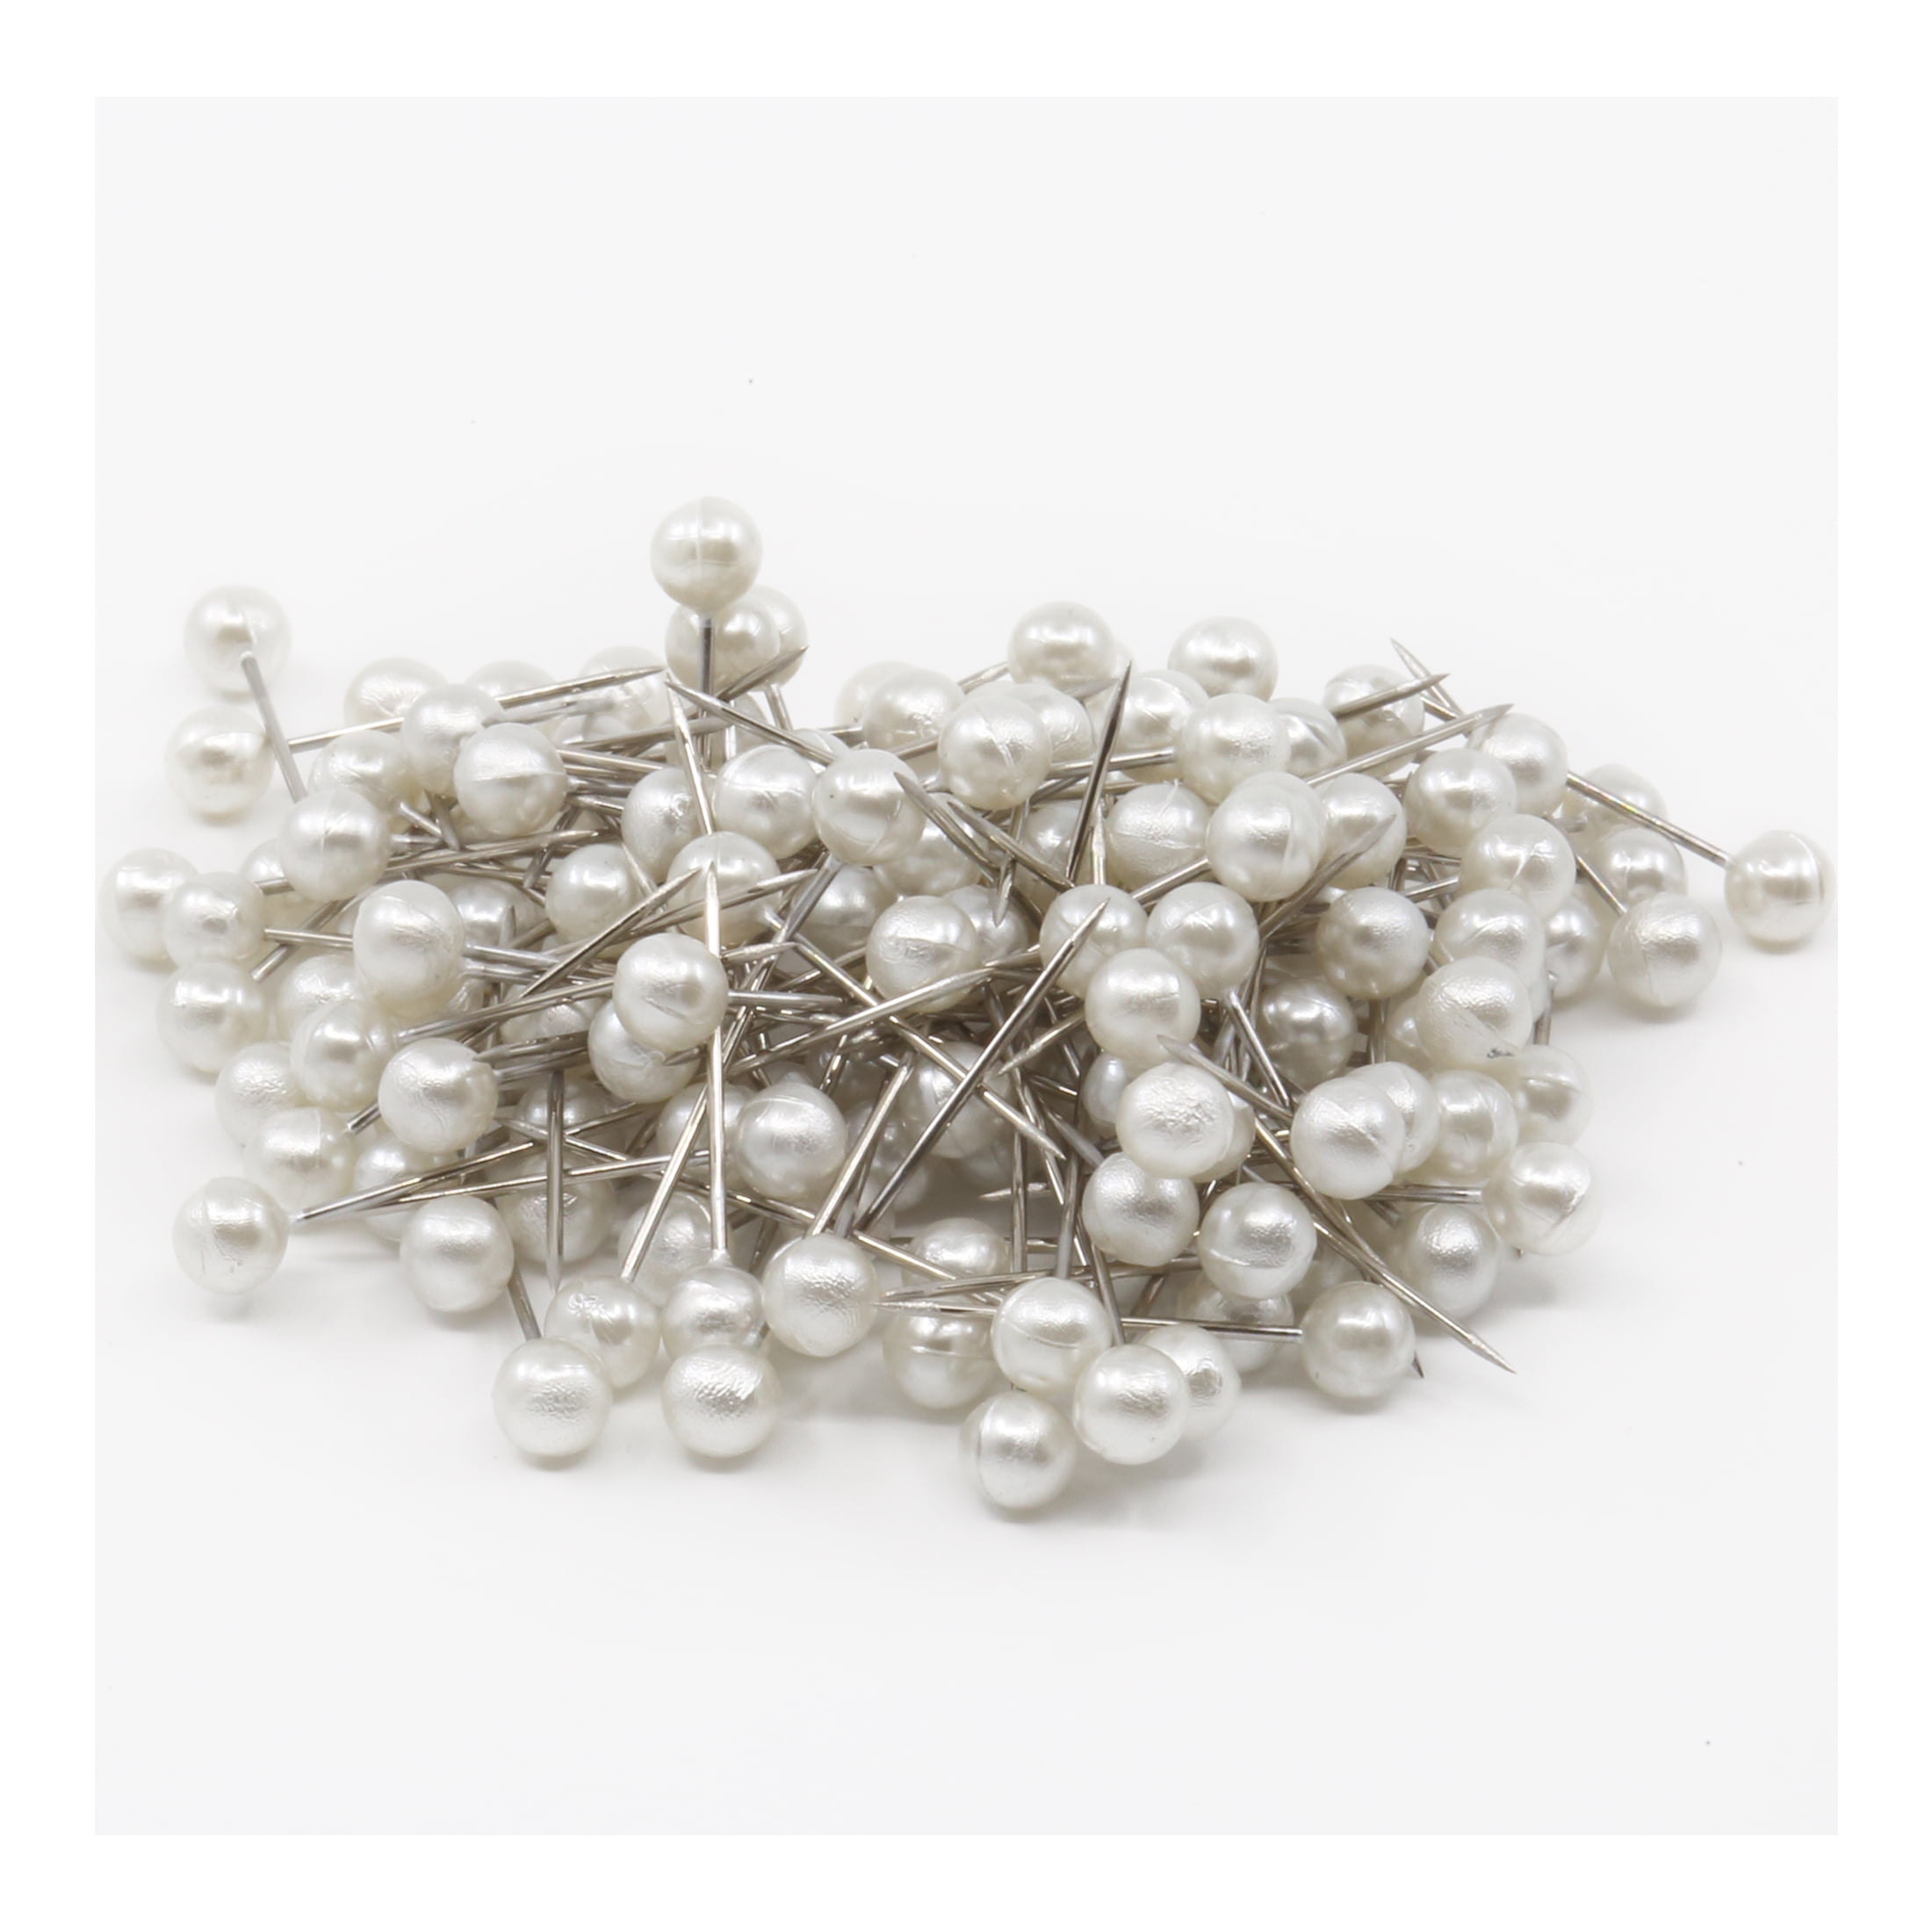 Petite Pearlized Pins By Loops & Threads™